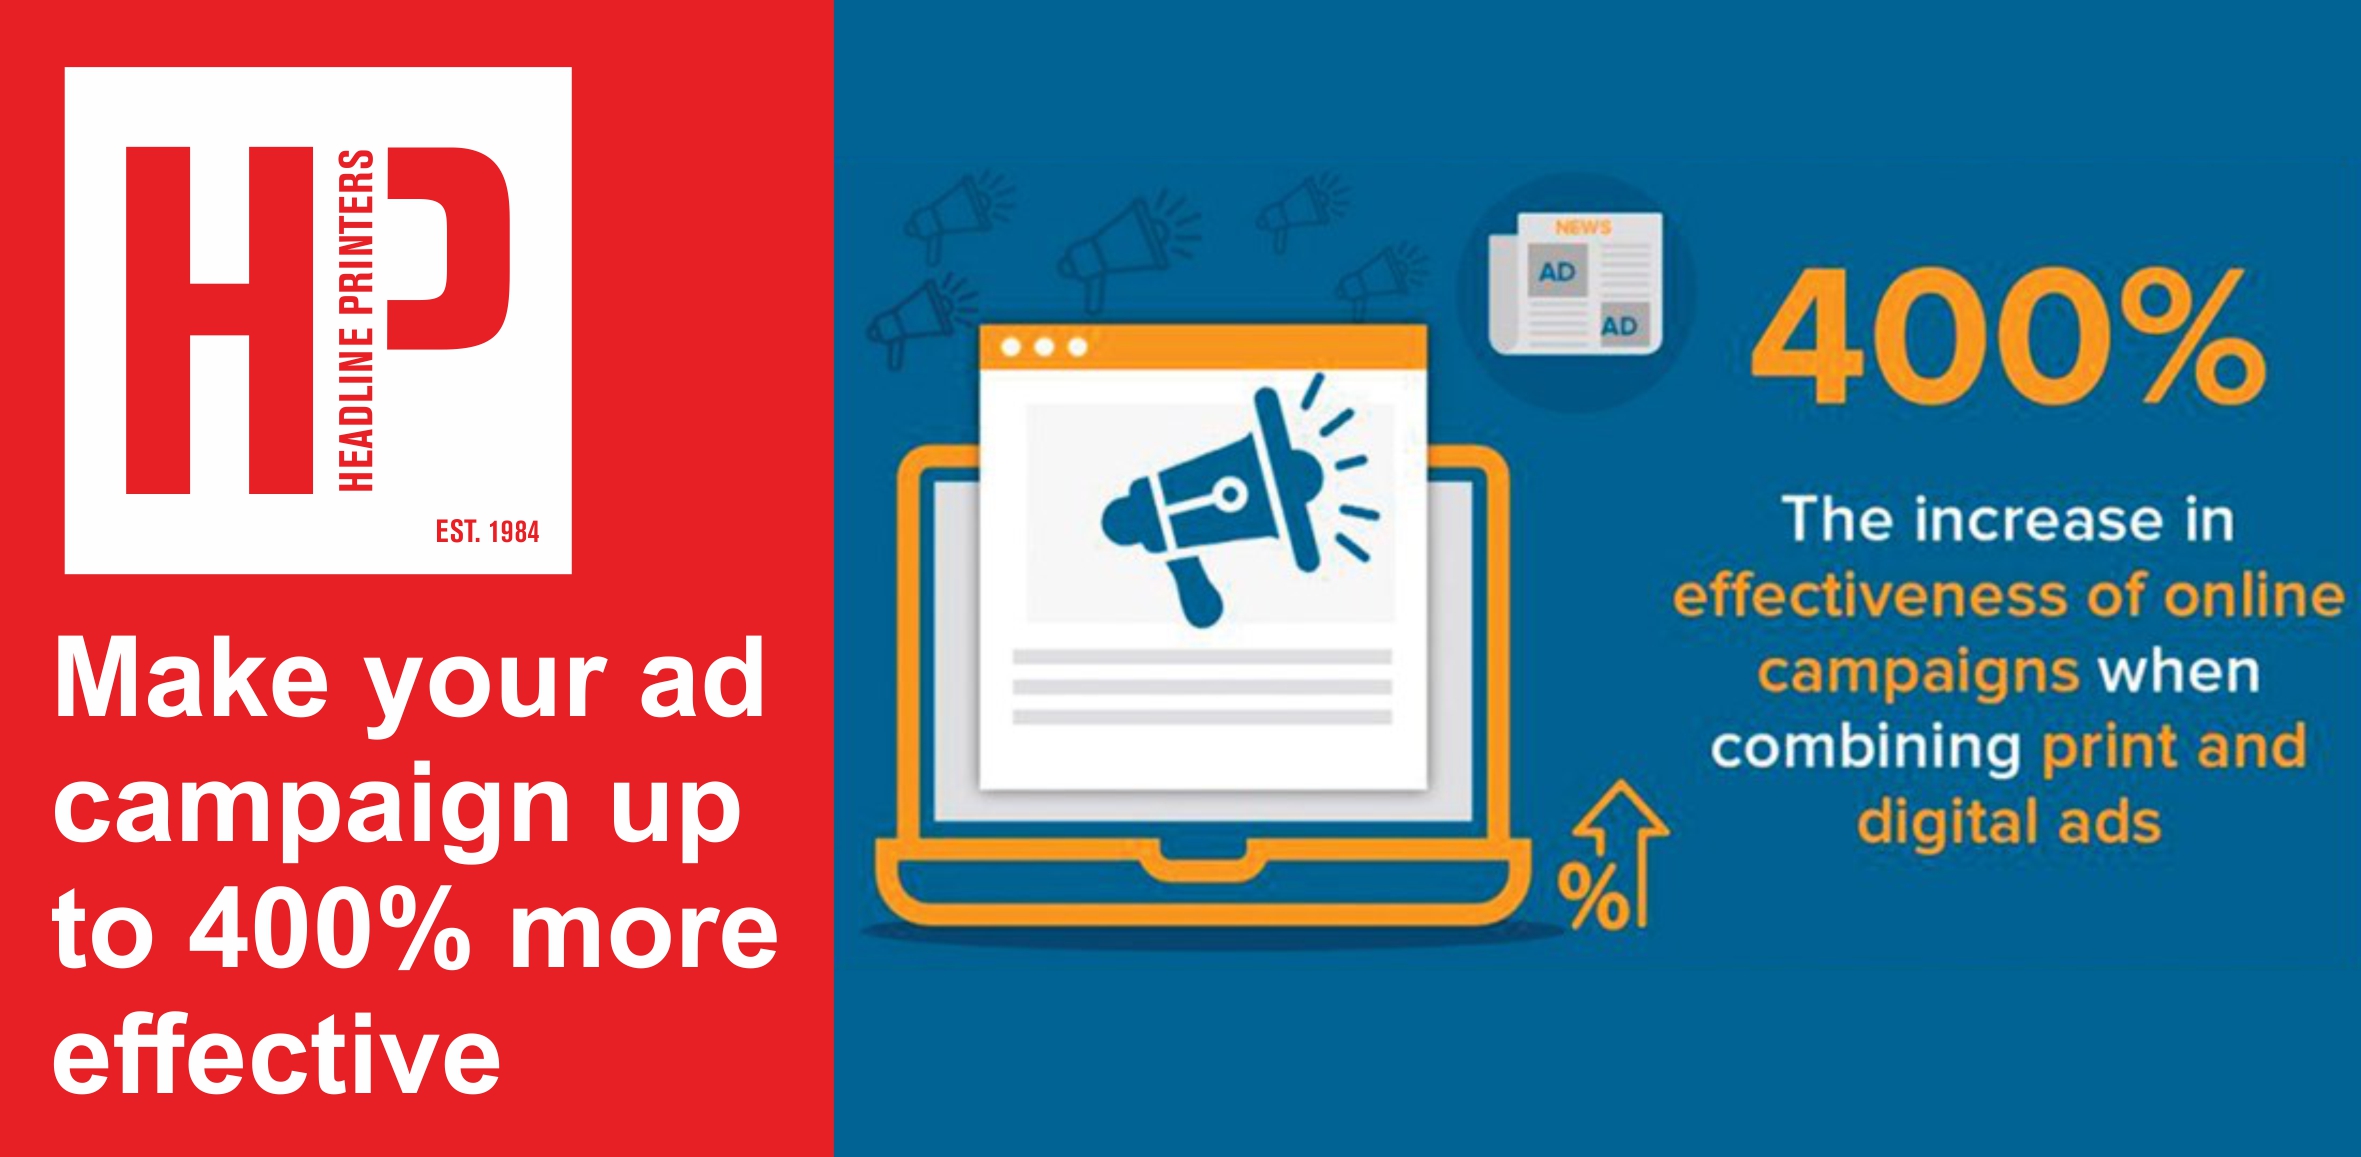 Make your ad campaign up to 400% more effective